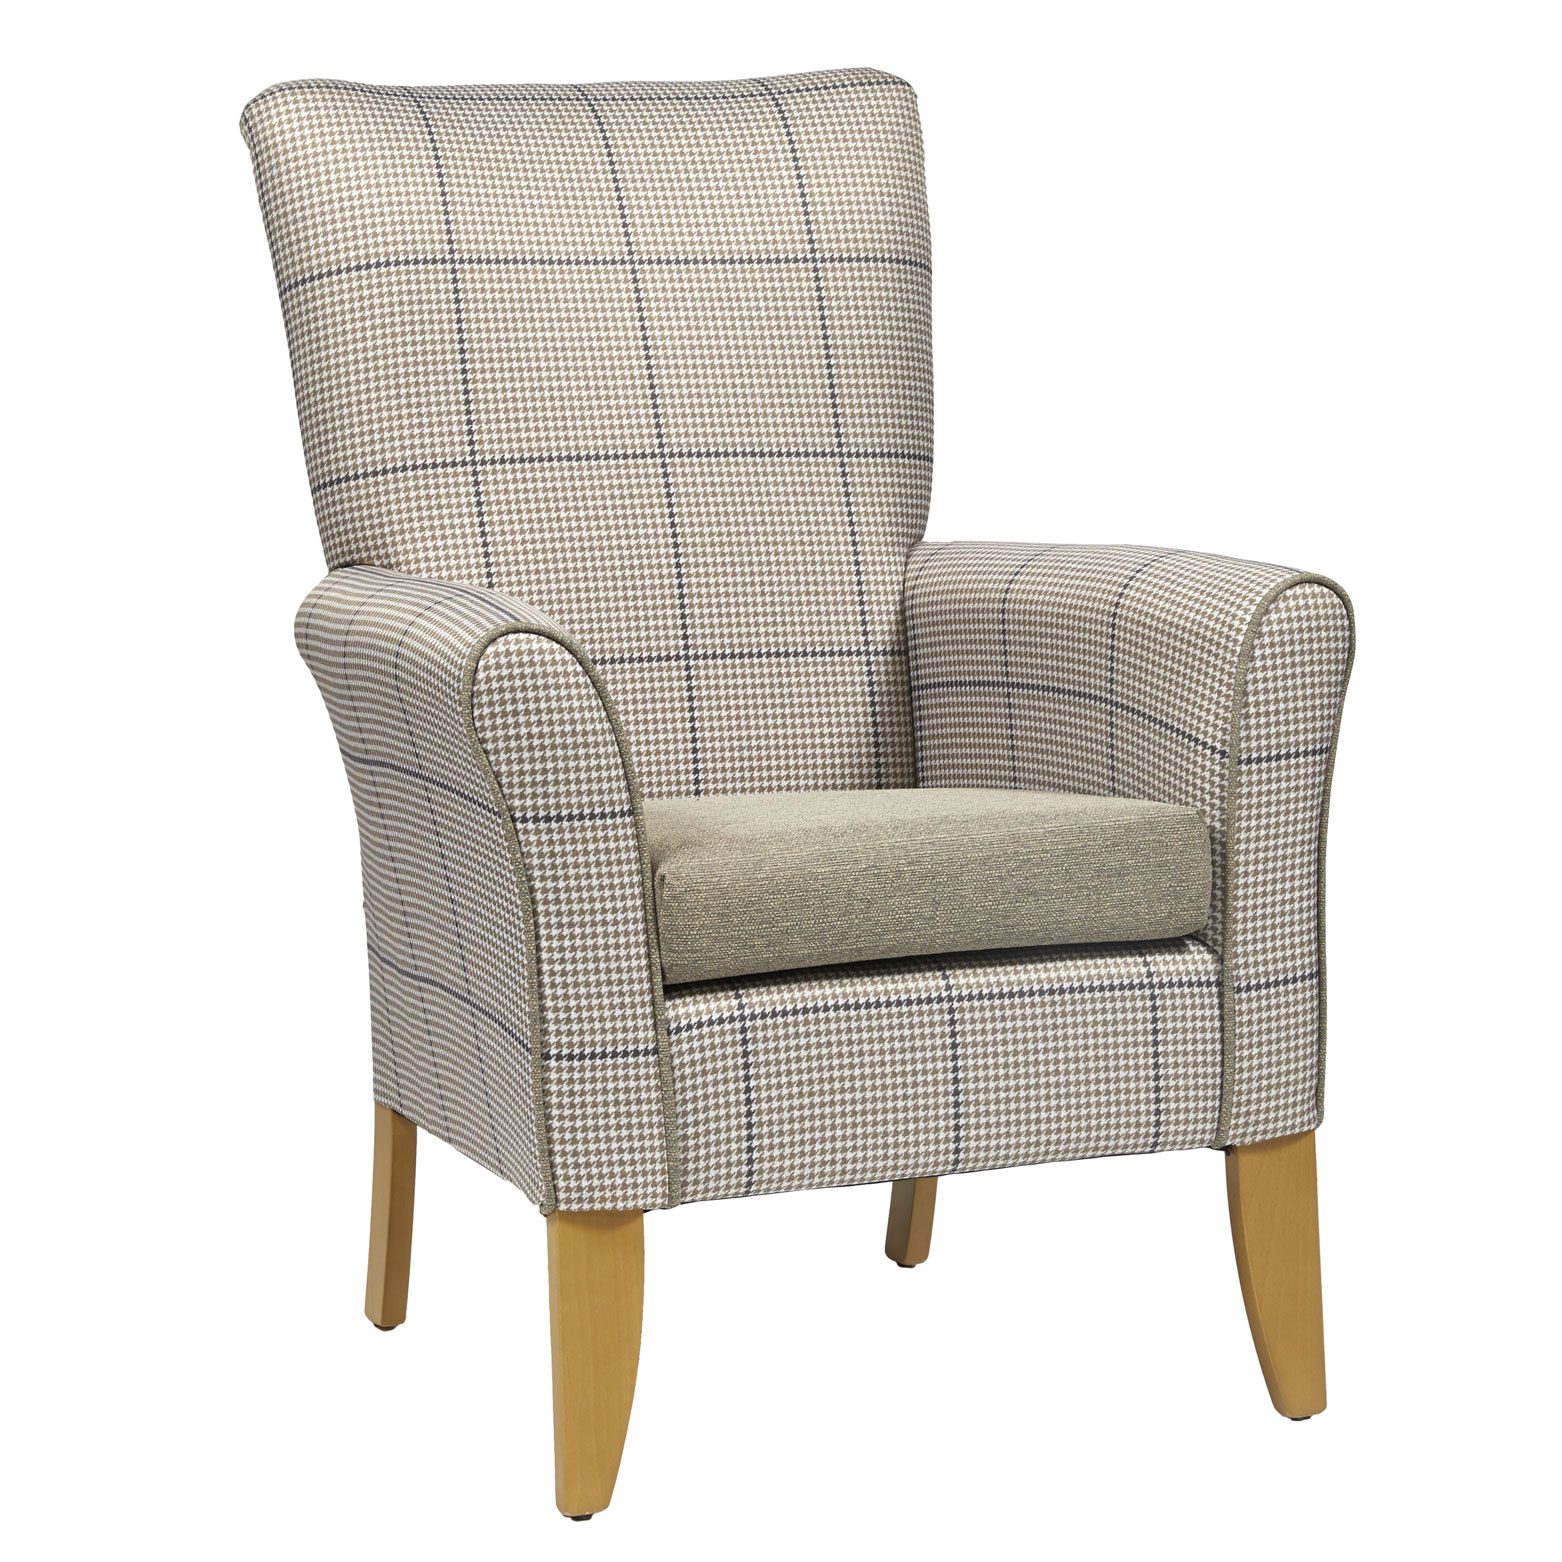 Cambourne High Back Chair